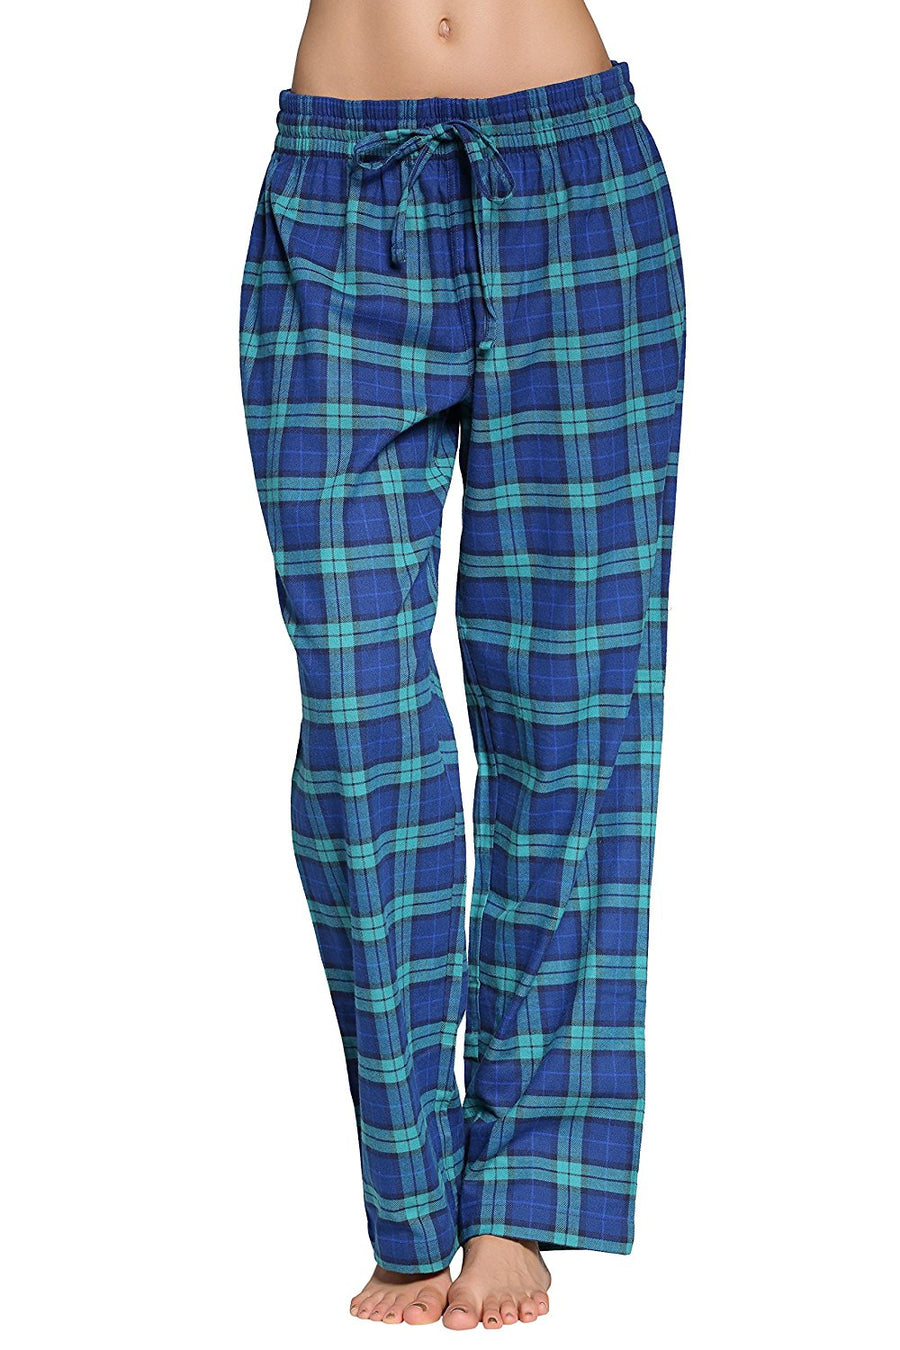 Buy Stylish Fancy Cotton Lounge Pants For Women Pack Of 2 Online In India  At Discounted Prices